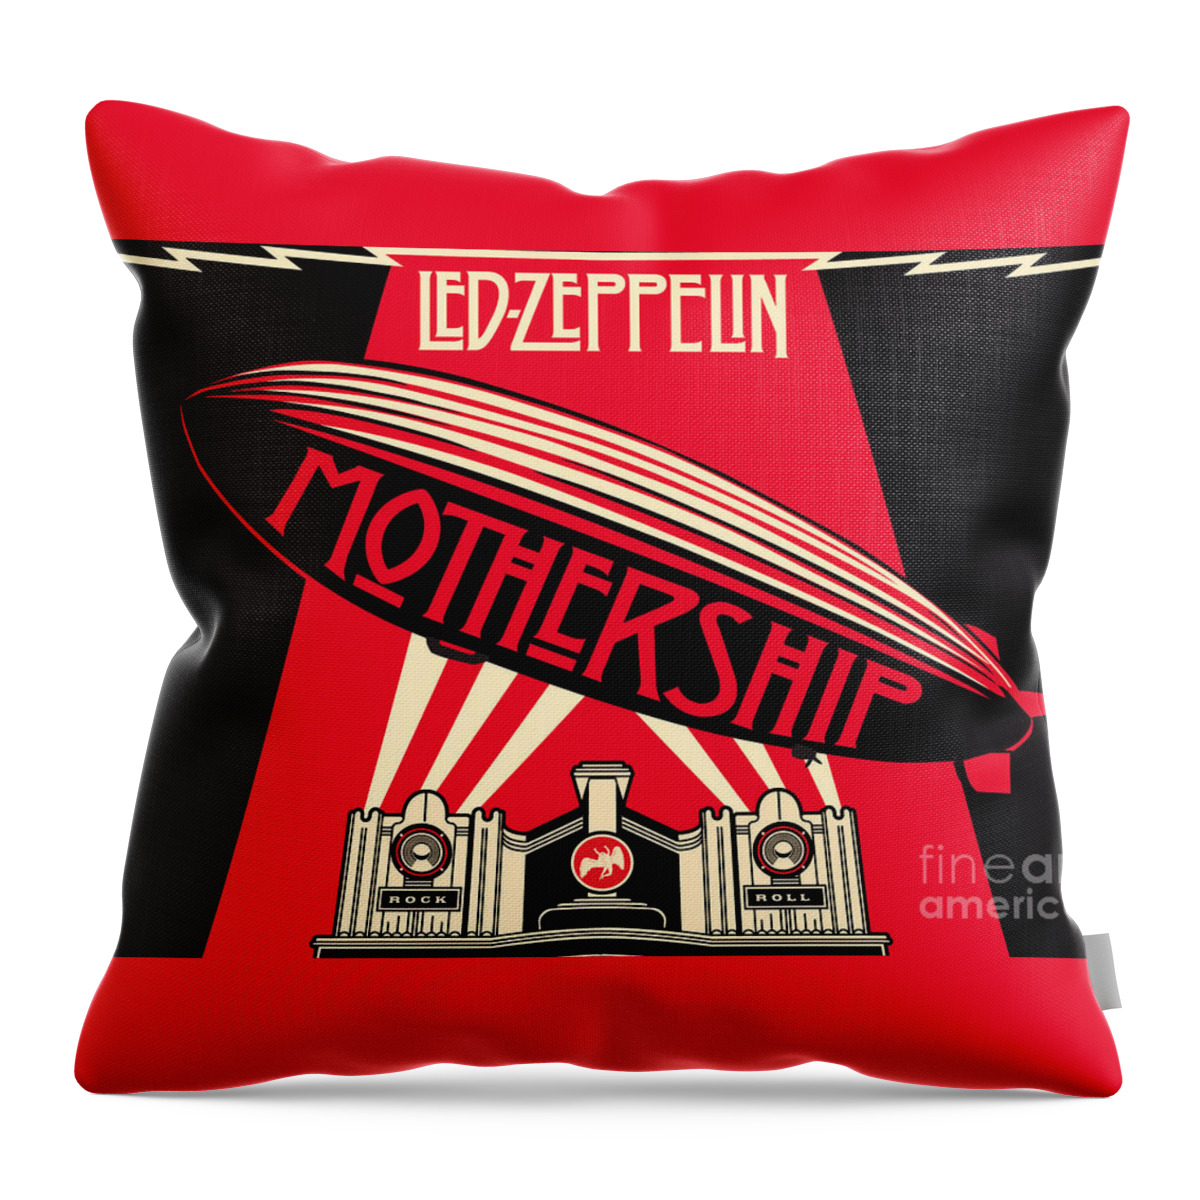 Led Zeppelin Throw Pillow featuring the photograph Led Zeppelin Mothership by Action